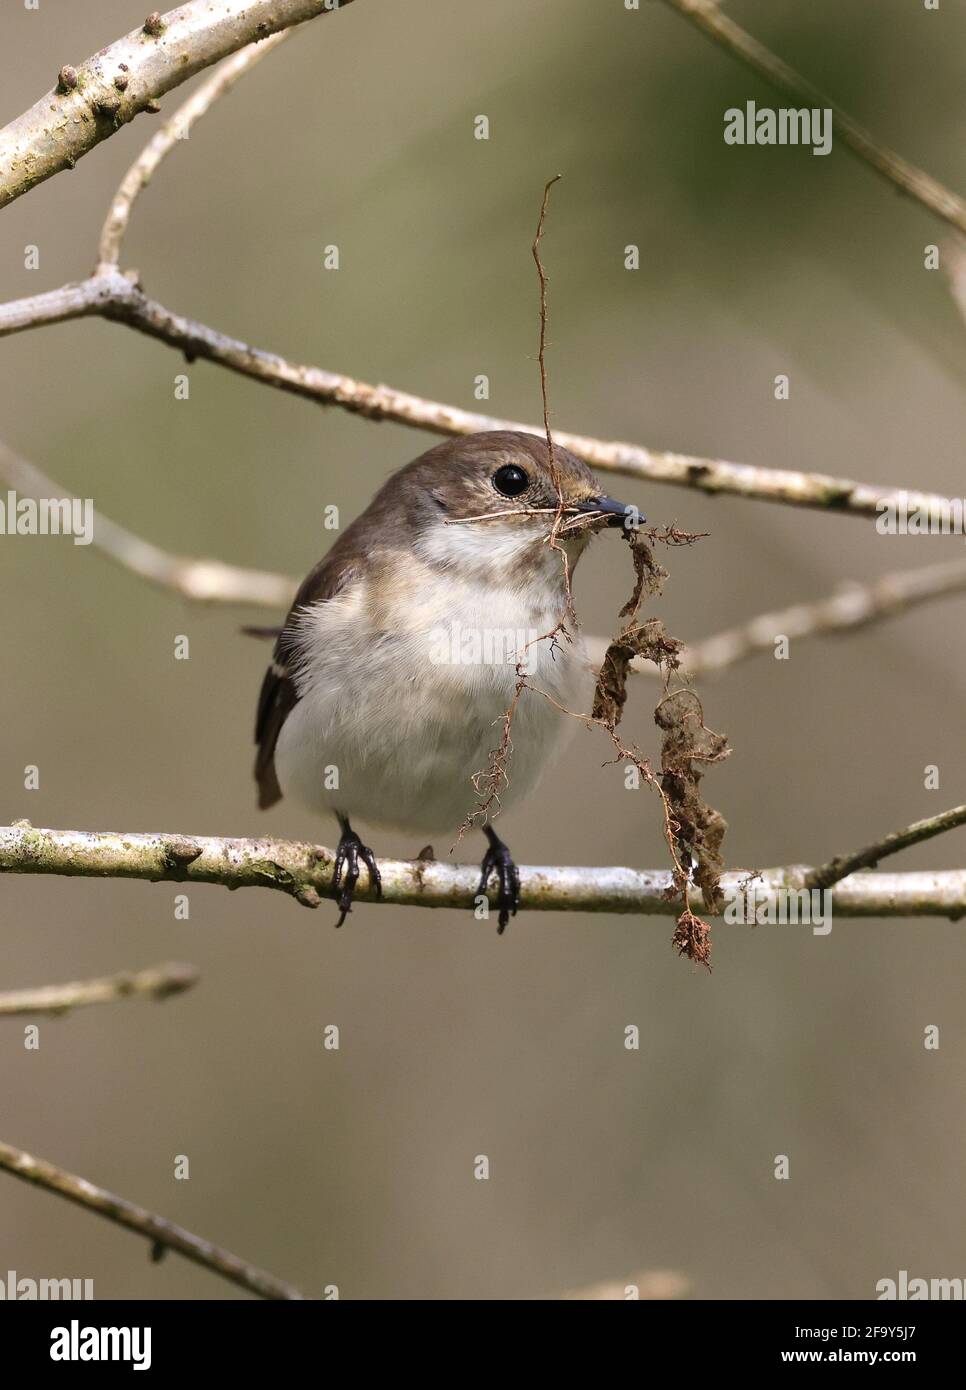 Pied Flycatcher, Ficedula hypoleuca, perched with nesting material in Mid Wales, U.K. April 2021 Stock Photo